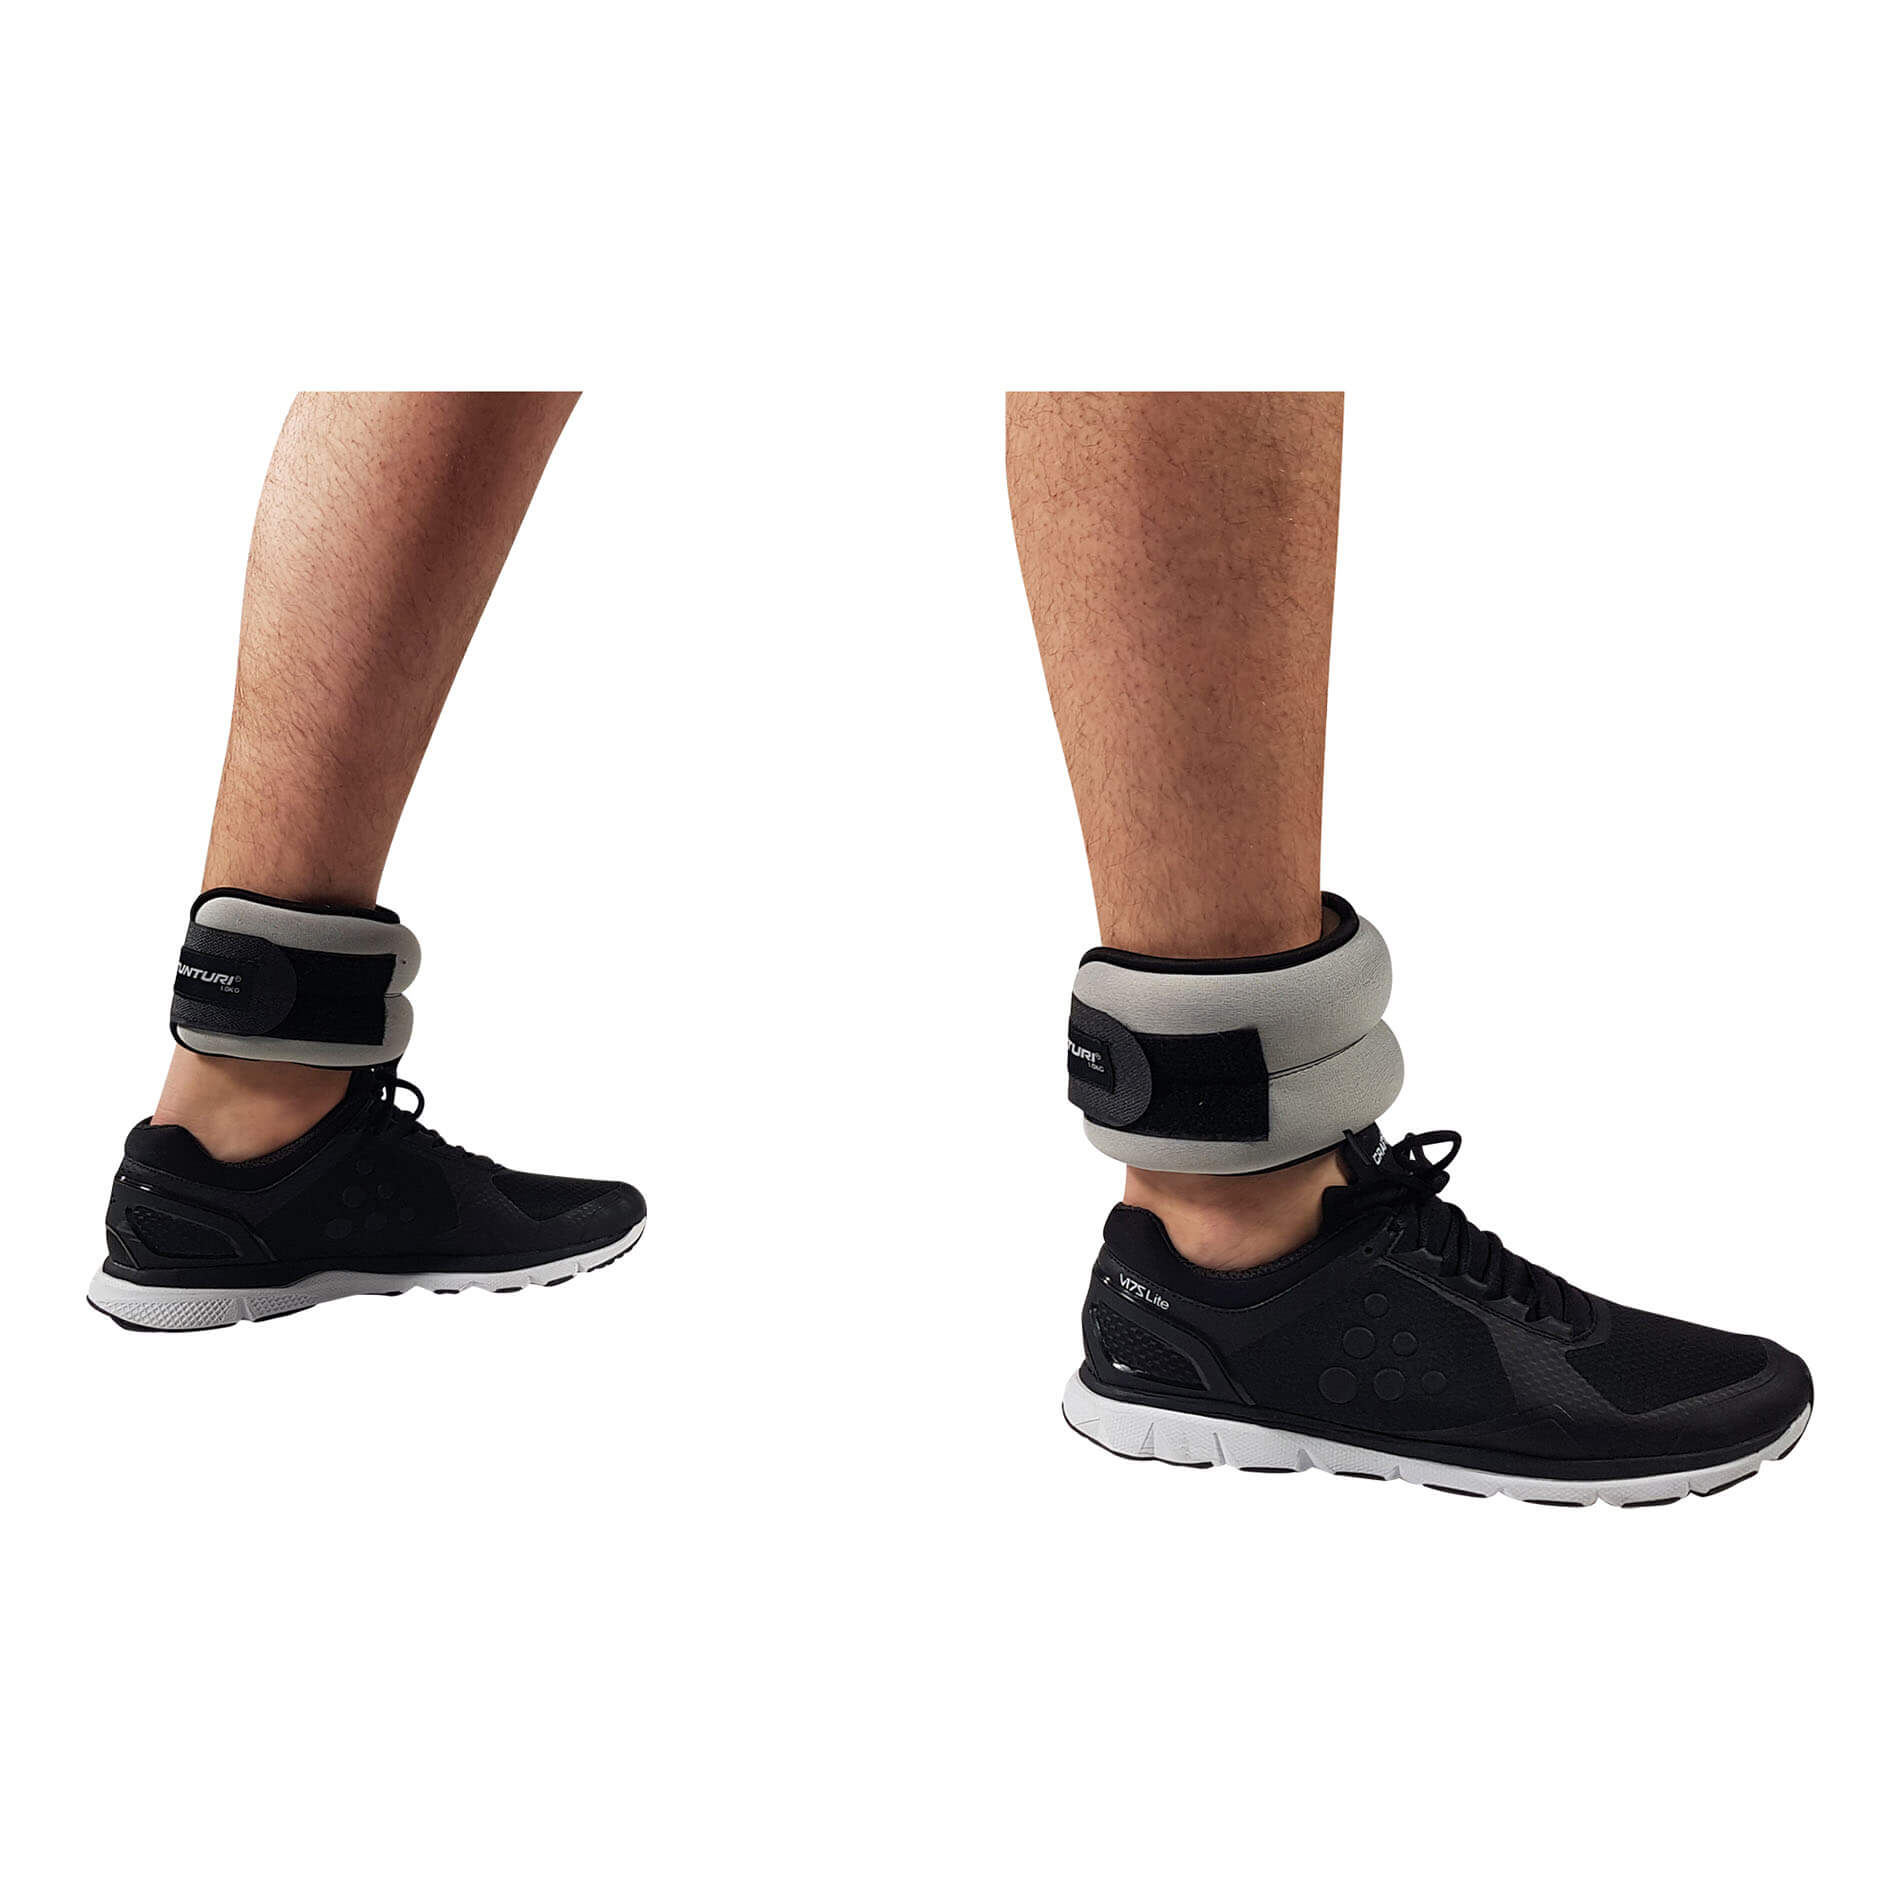 Wrist/Ankle Weights 1.0kg, Pair